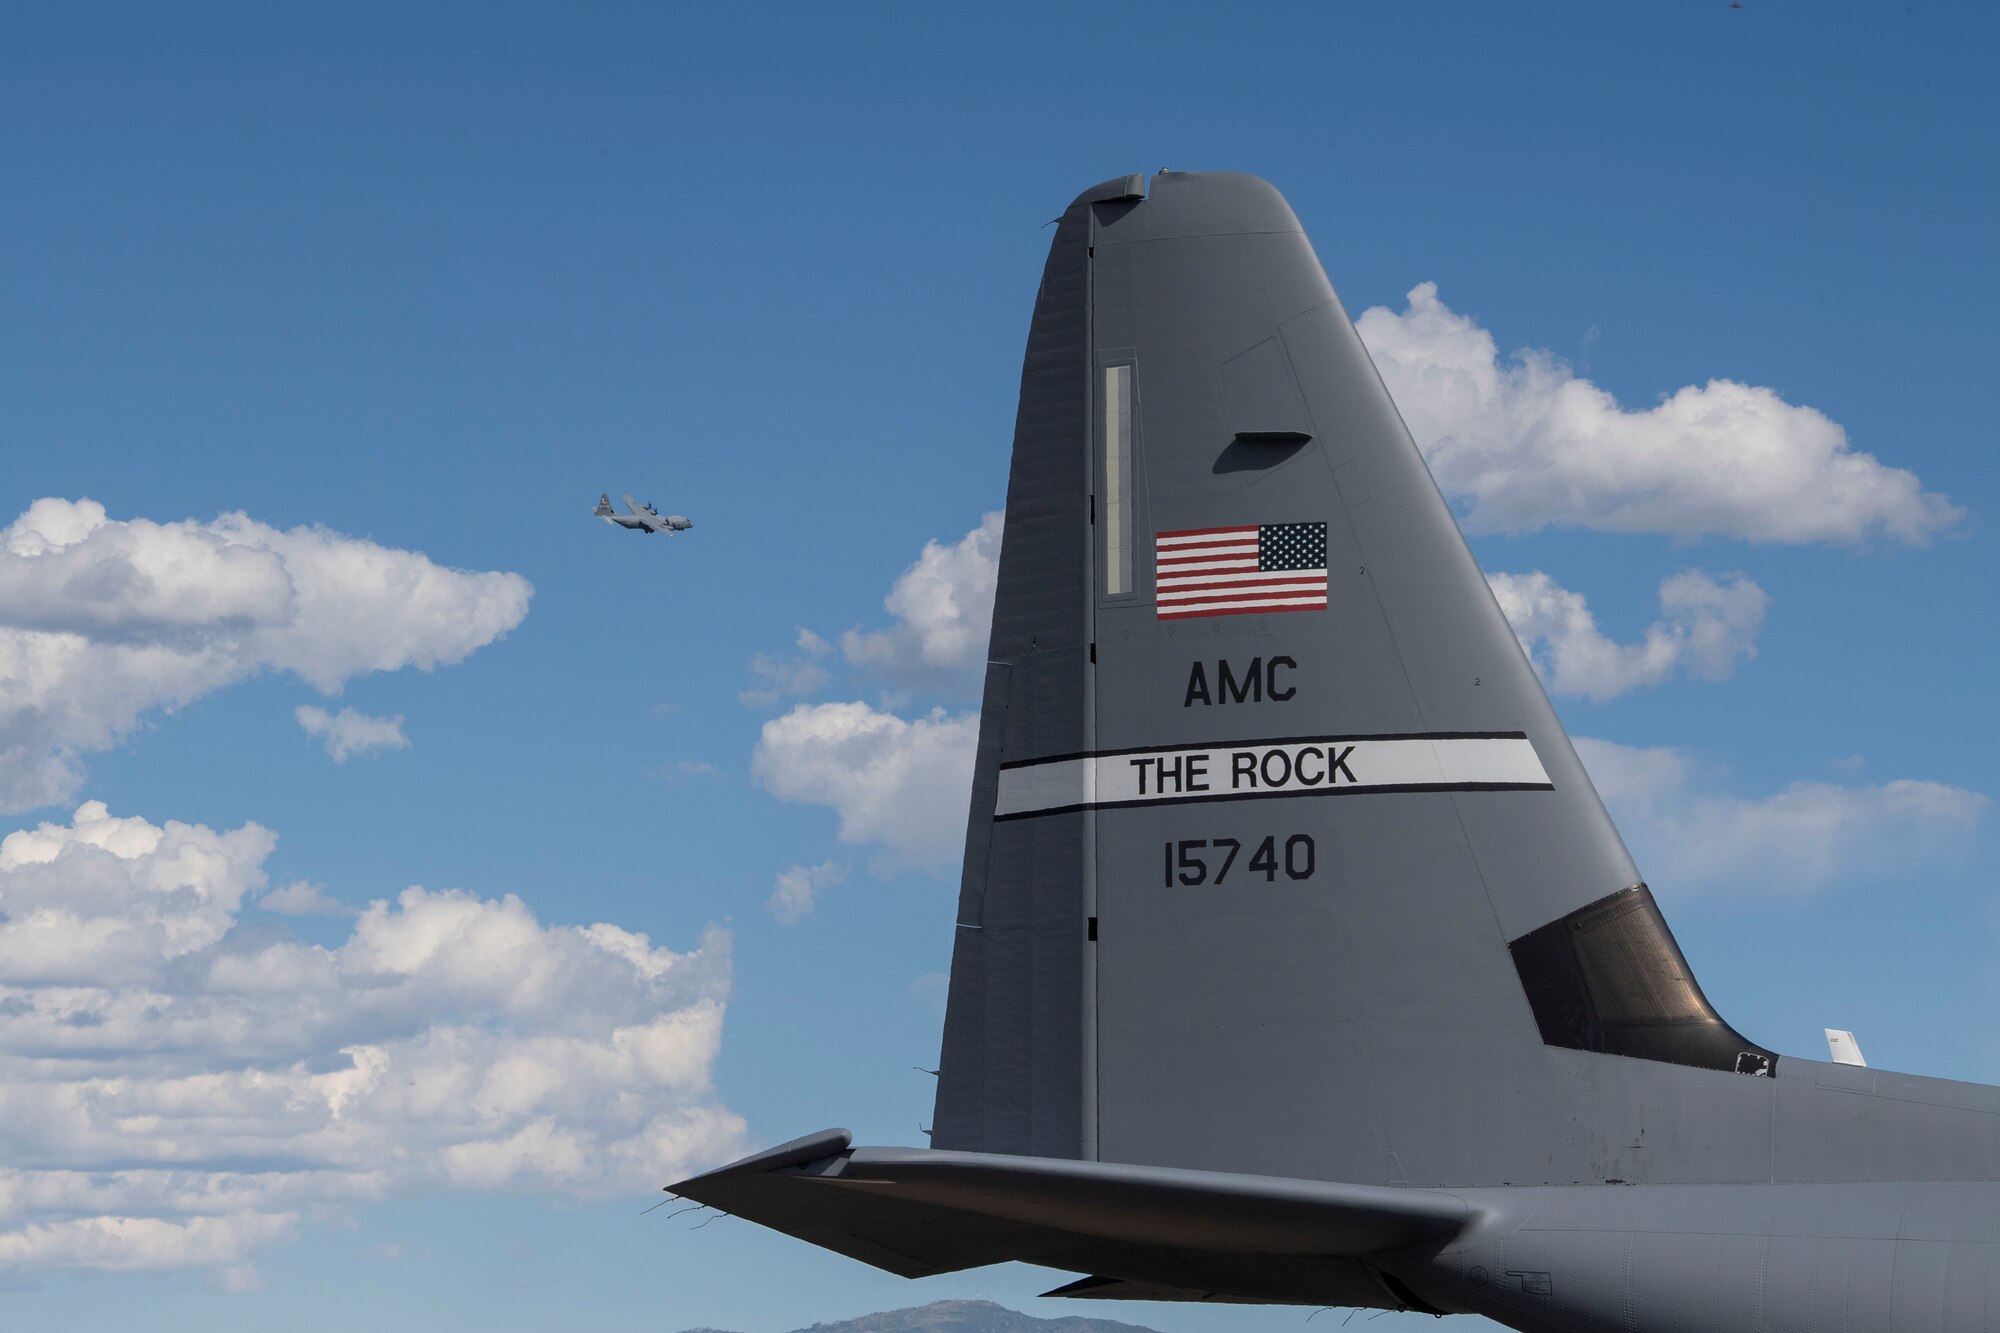 A C-130J Super Hercules assigned to the 41st Airlift Squadron flies above the flightline during pre-deployment training at Montrose Regional Airport, Colorado, July 29, 2020. This training environment helped the 41st AS familiarize the crews to mountainous terrain and high pressure altitudes similar to what they will encounter in their area of responsibility overseas. (U.S. Air Force photo by Airman 1st Class Aaron Irvin)